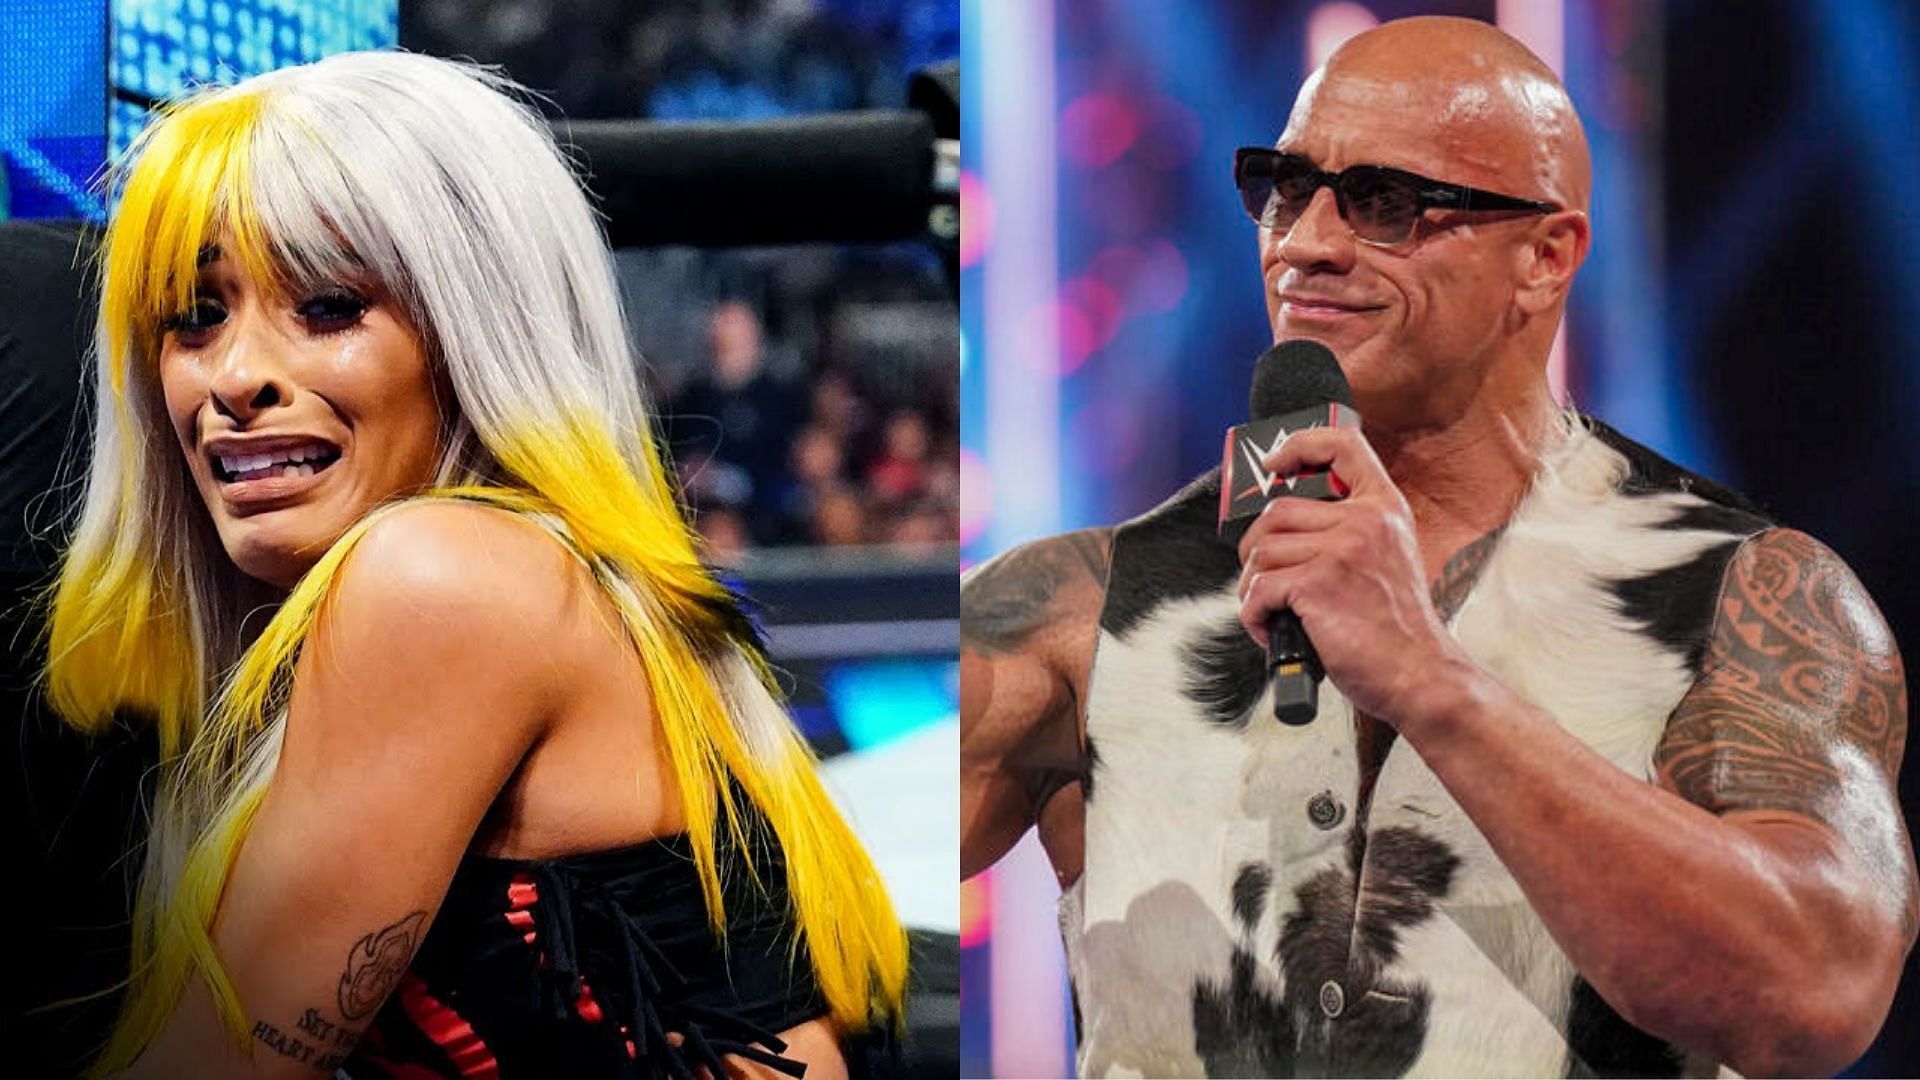 Zelina Vega reacted to a photo featuring The Rock with a WWE star